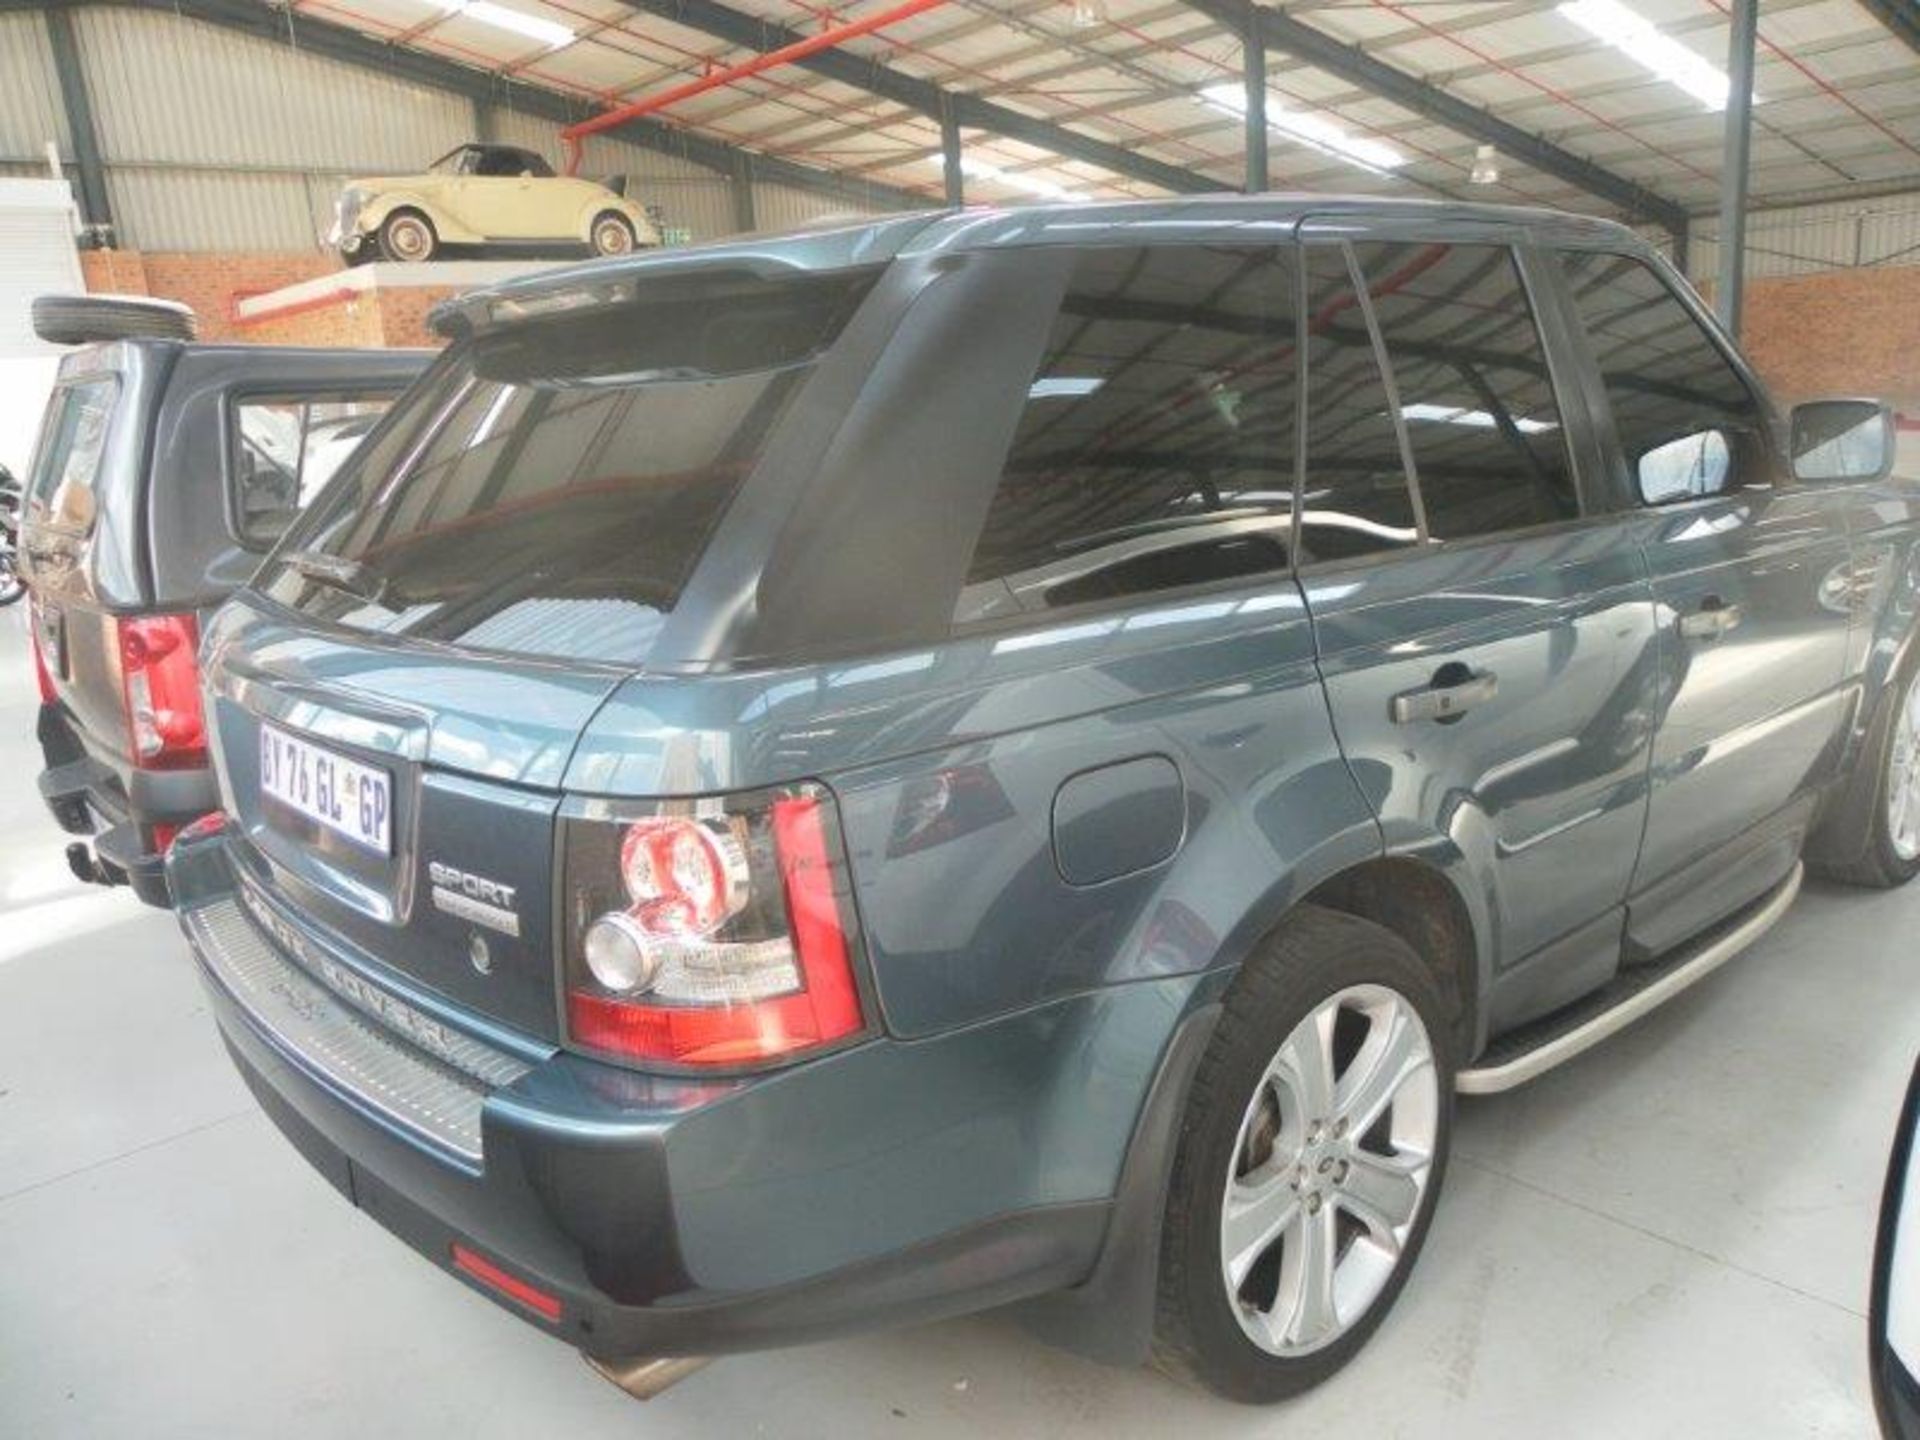 2010 BY76GLGP Range Rover Sport 5.0 V8 Supercharged Auto (Vin No: SALLSAAE3AA253857 )(78 150 kms) - Image 3 of 3